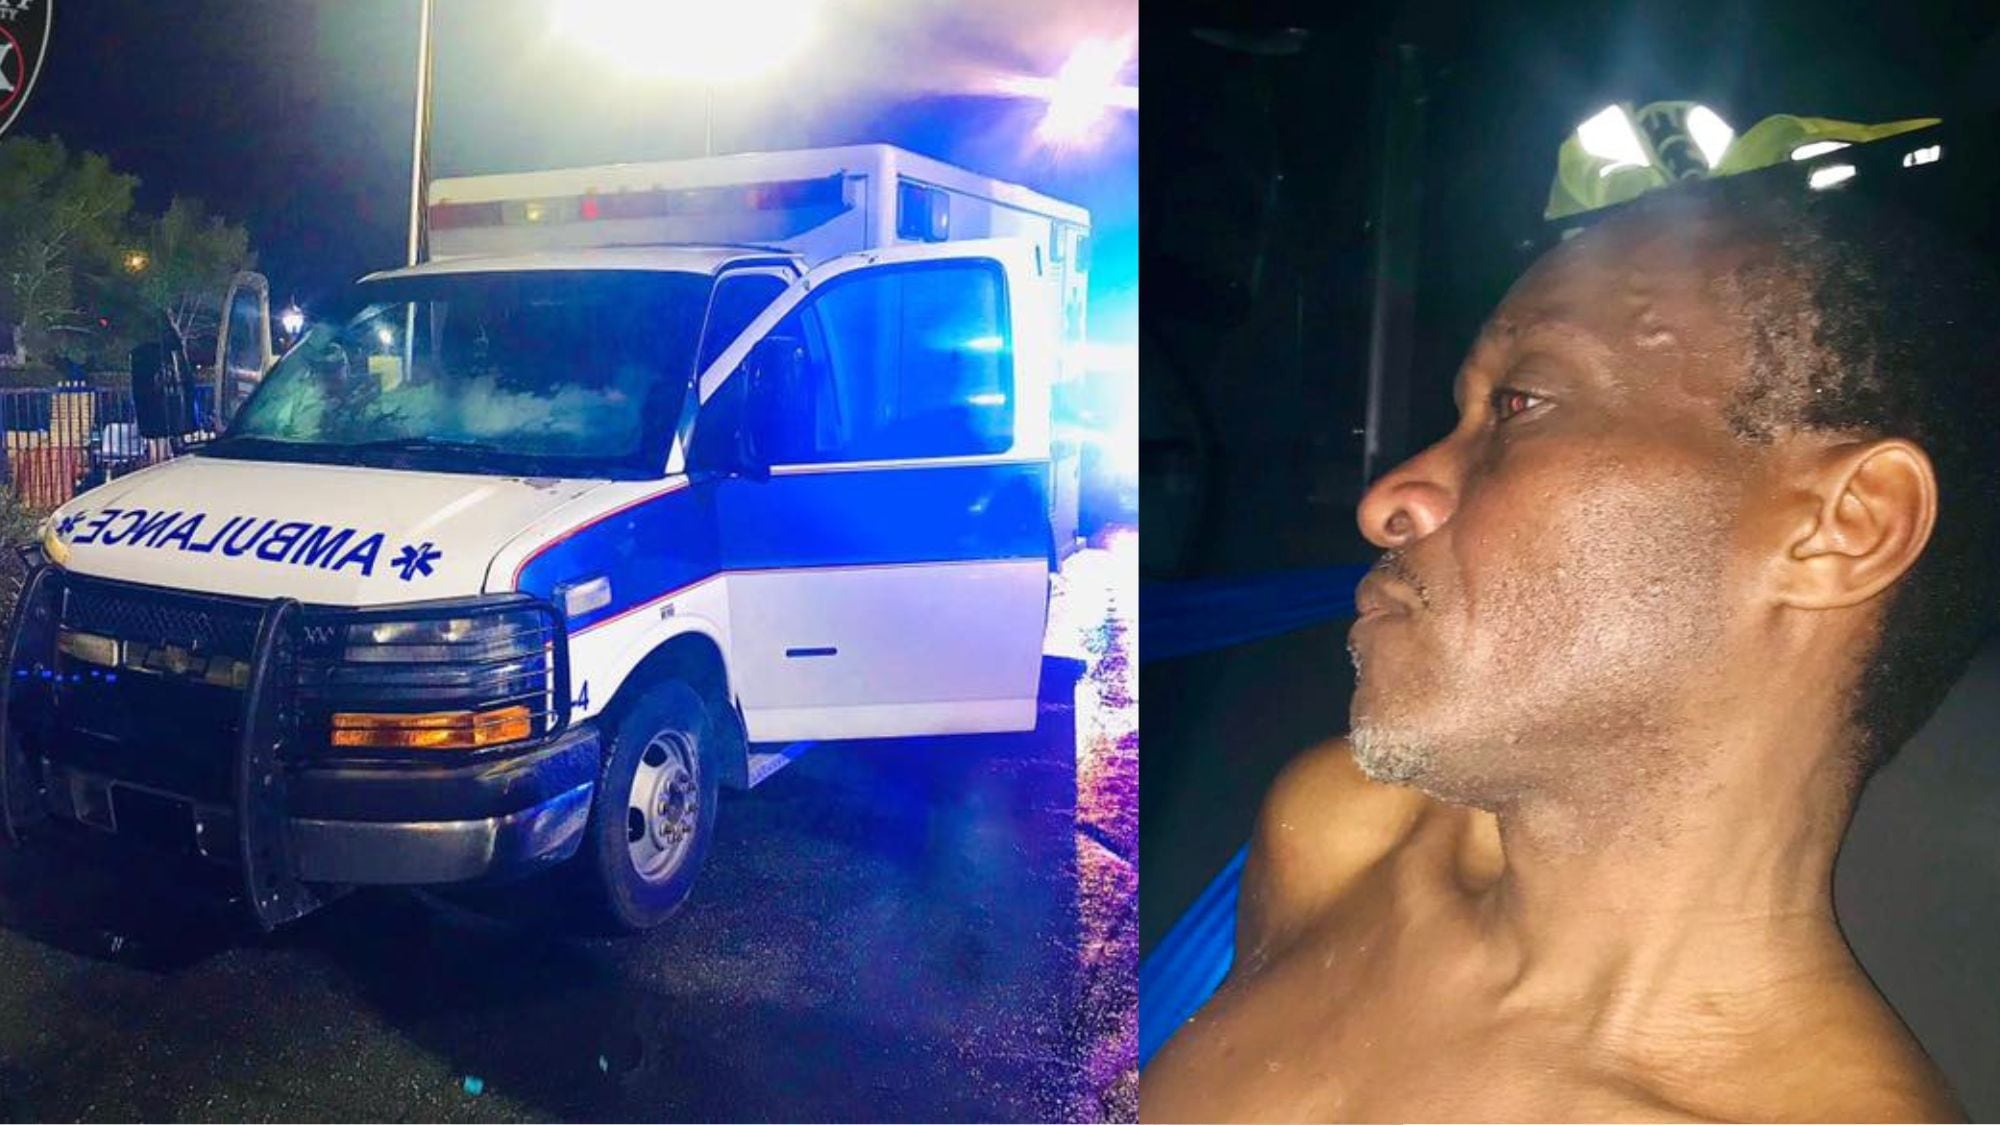 Bradley Jermaine Baker was allegedly under the influence of narcotics after stealing an ambulance leading to a short pursuit. 